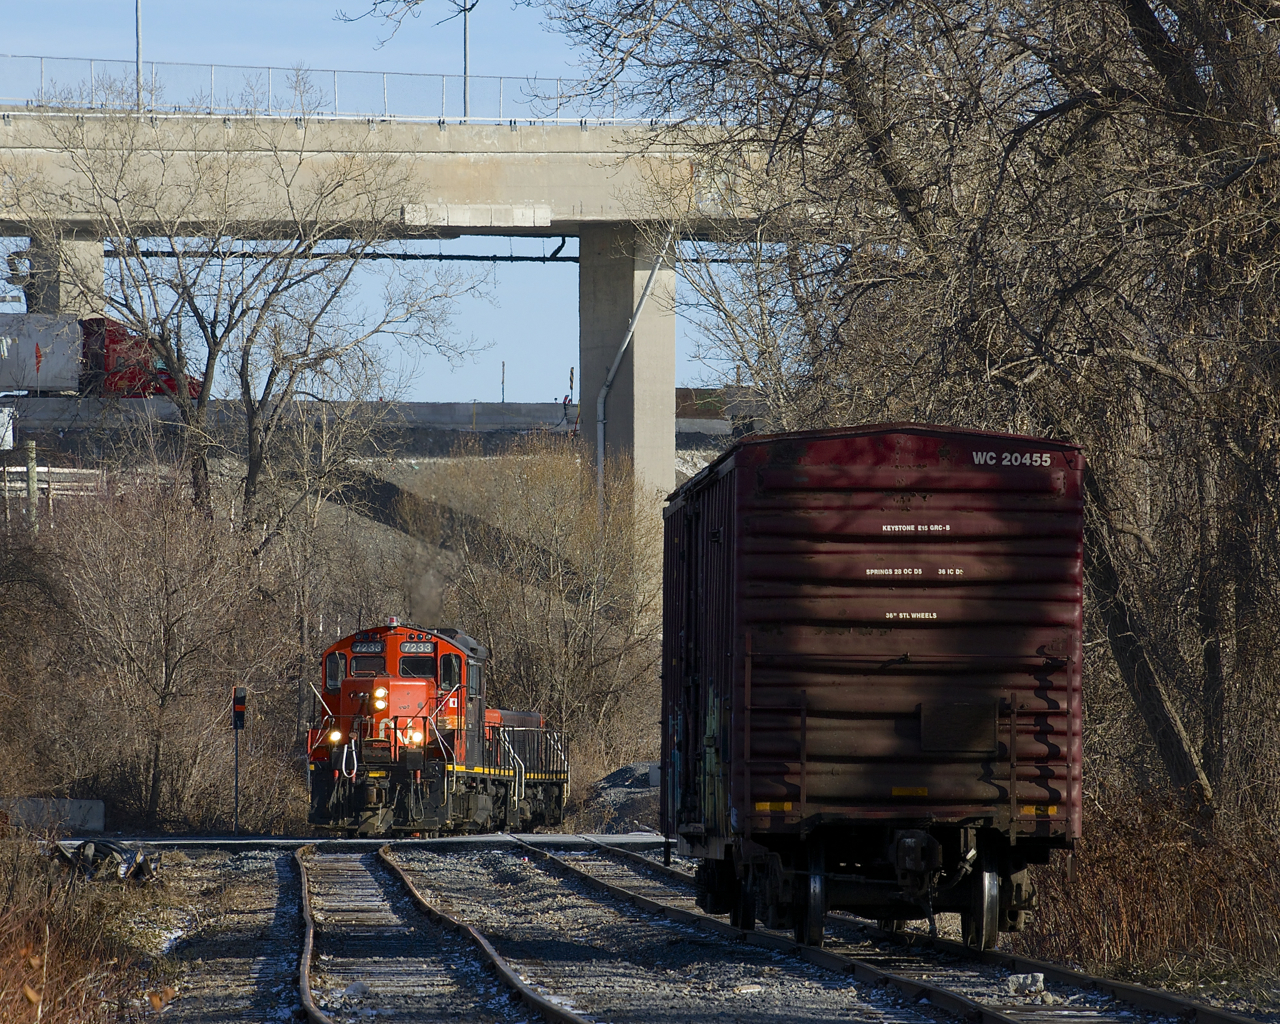 After putting a single boxcar in the siding, the power runs around the car before shoving it into the Kruger Plant located at the end of the Turcot Holding Spur. In the background is the rapidly changing Turcot interchange, with the new, lower lanes already in use, and the higher and older lanes soon to be demolished.